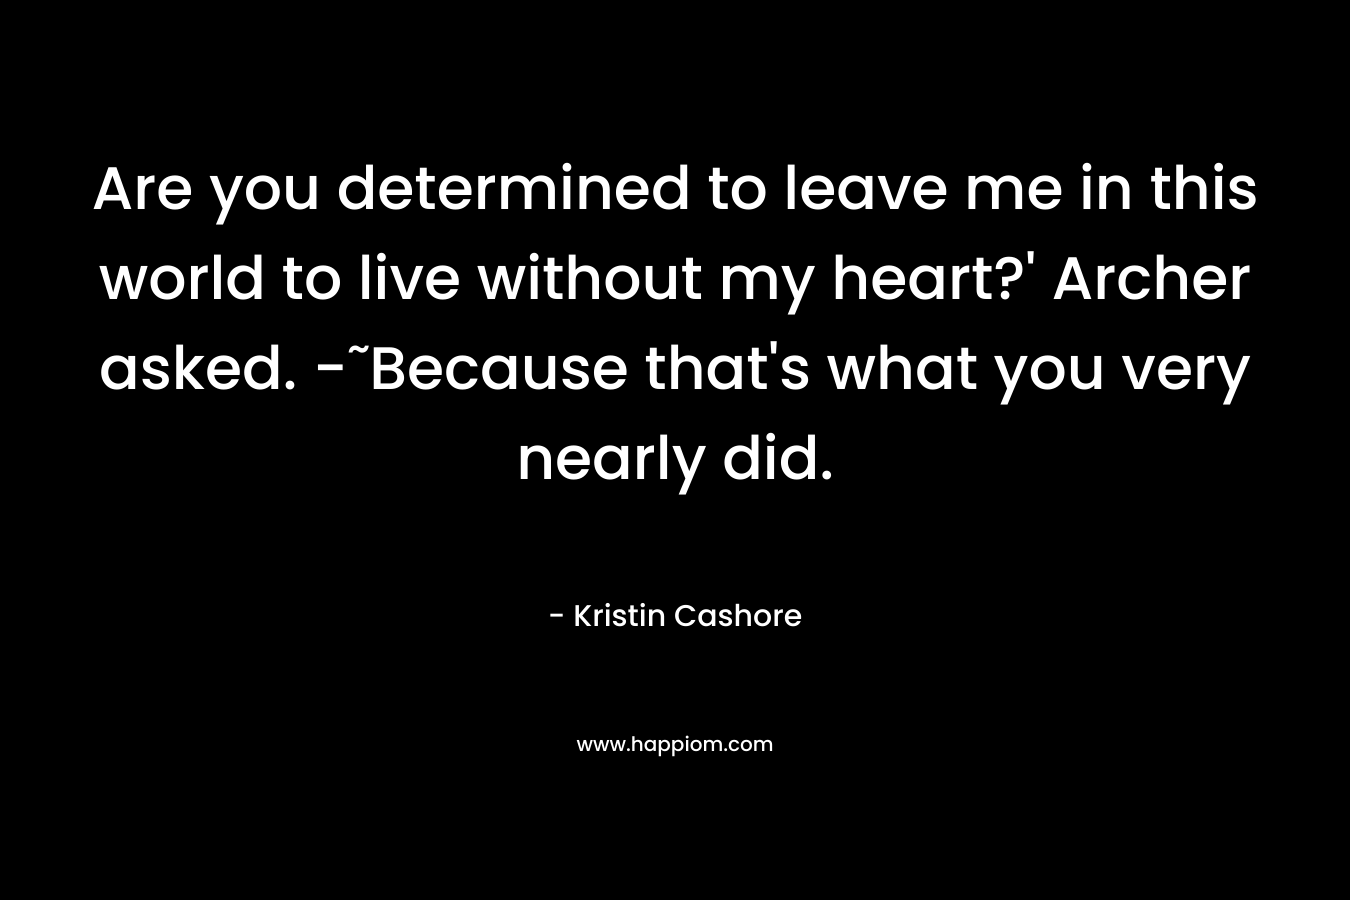 Are you determined to leave me in this world to live without my heart?’ Archer asked. -˜Because that’s what you very nearly did. – Kristin Cashore